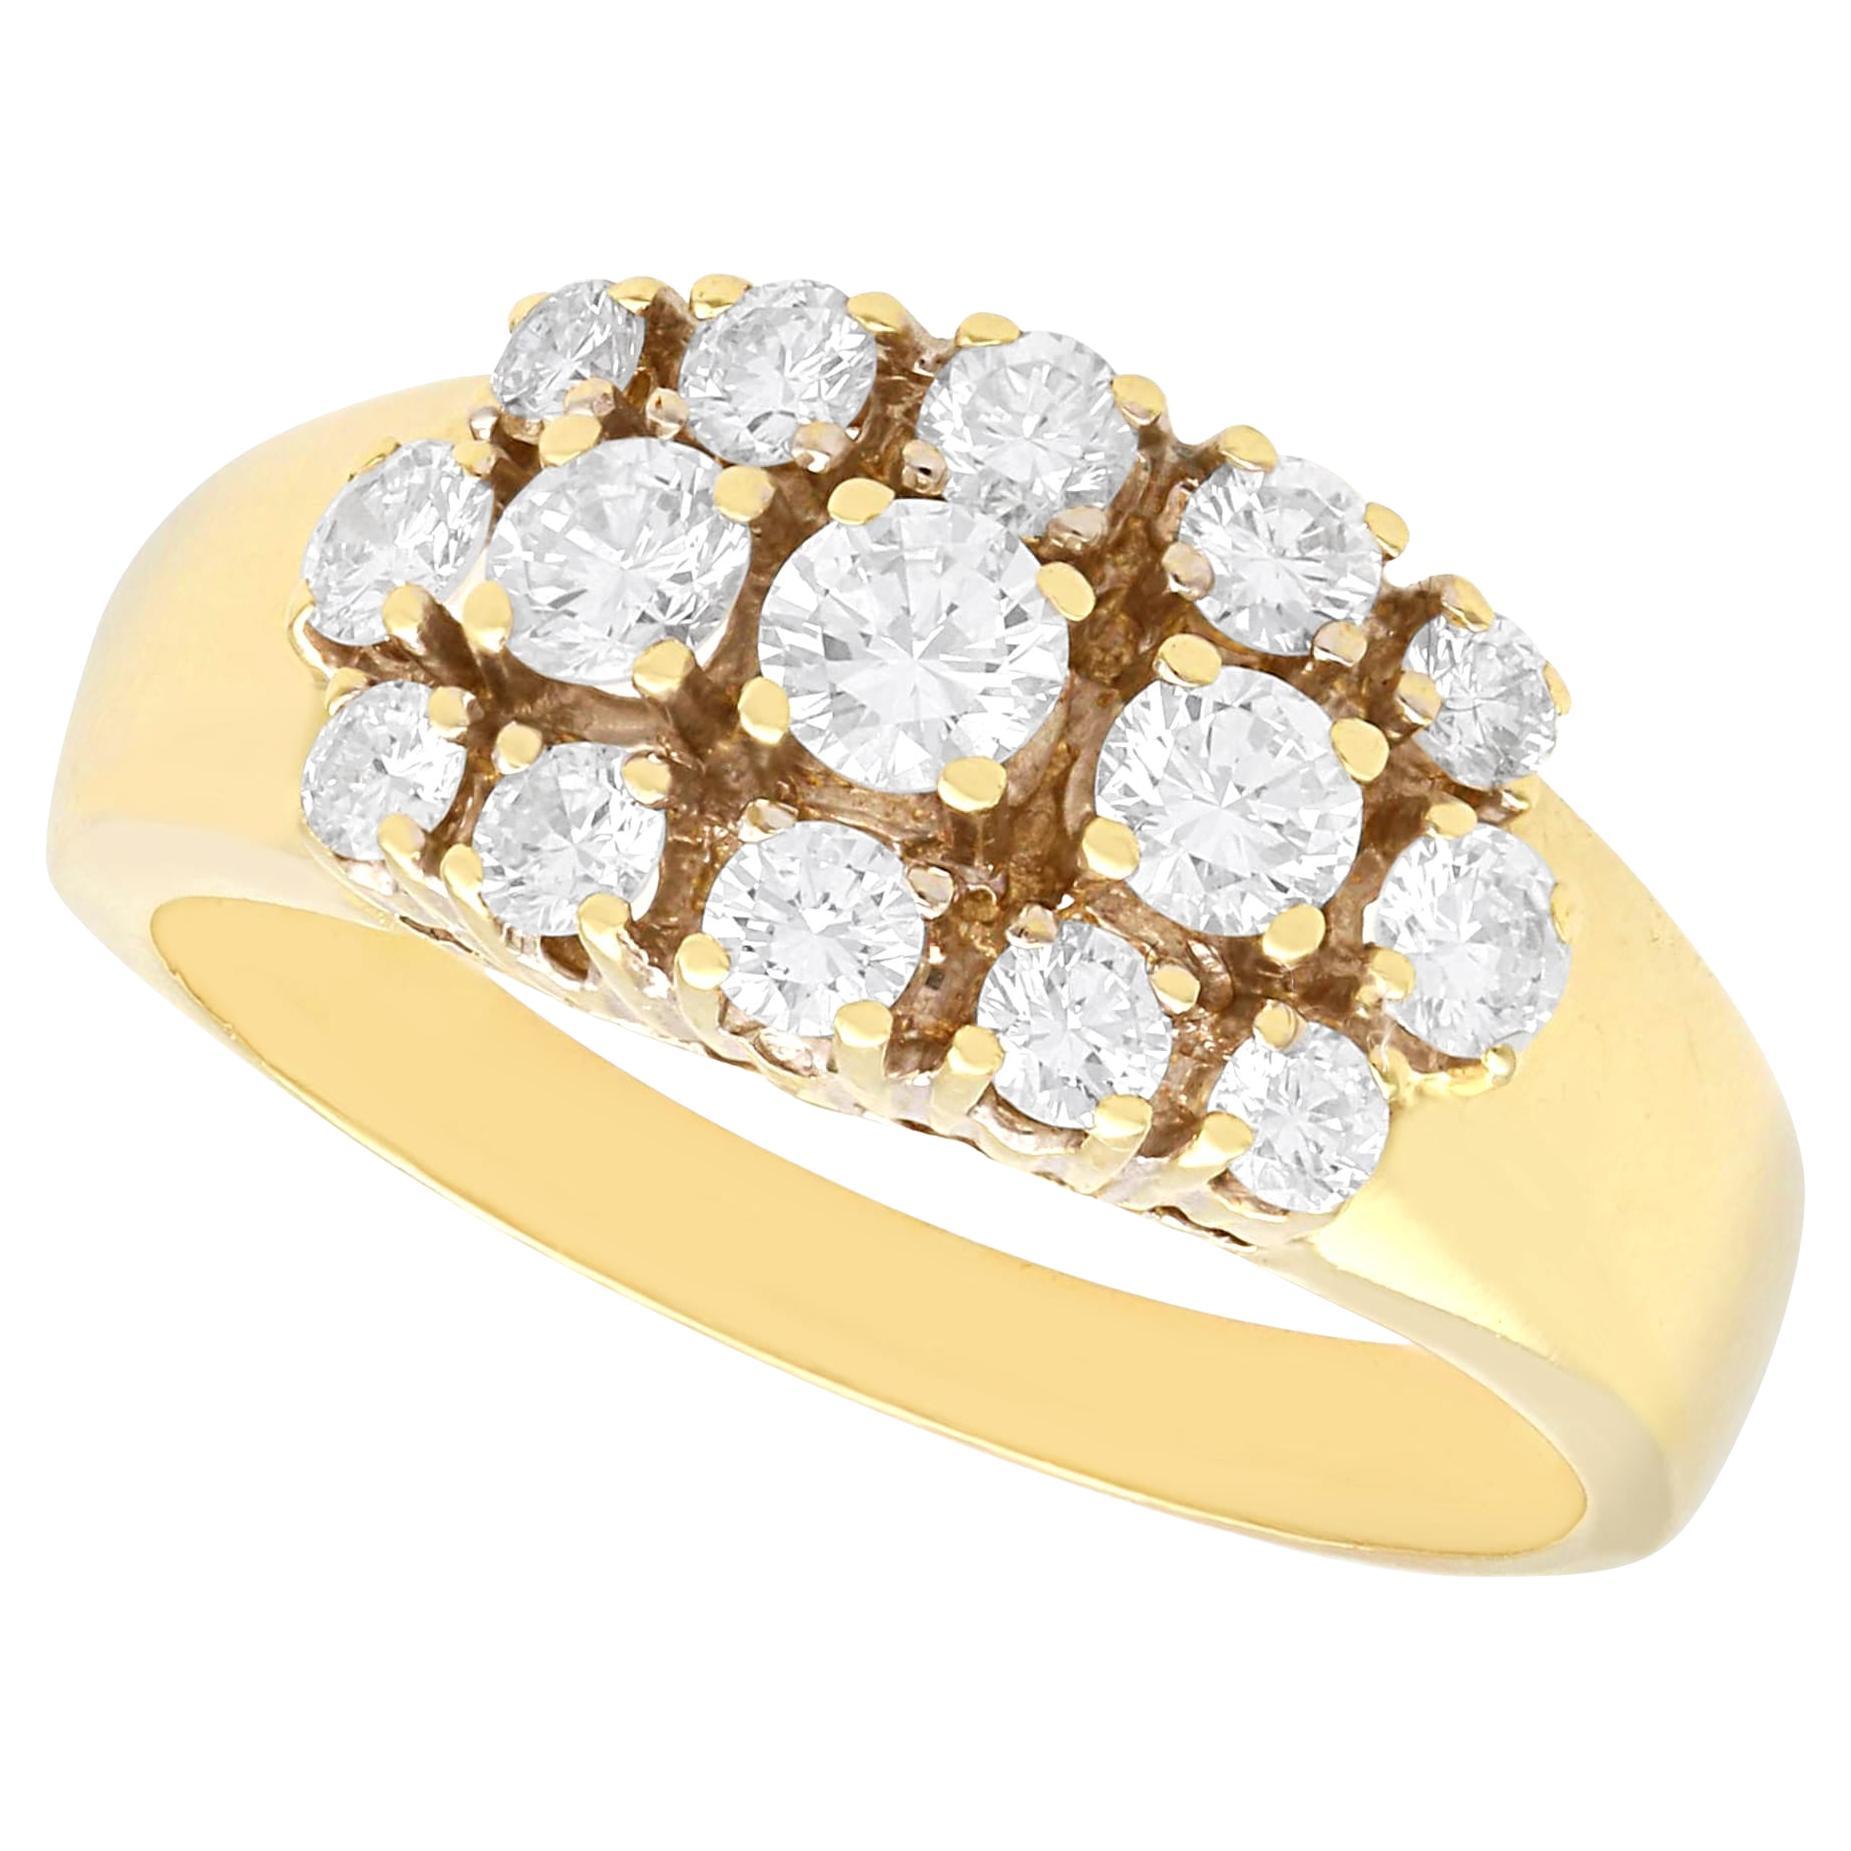 Vintage 1.56 Carat Diamond and 14k Yellow Gold Dress Ring Circa 1960 For Sale